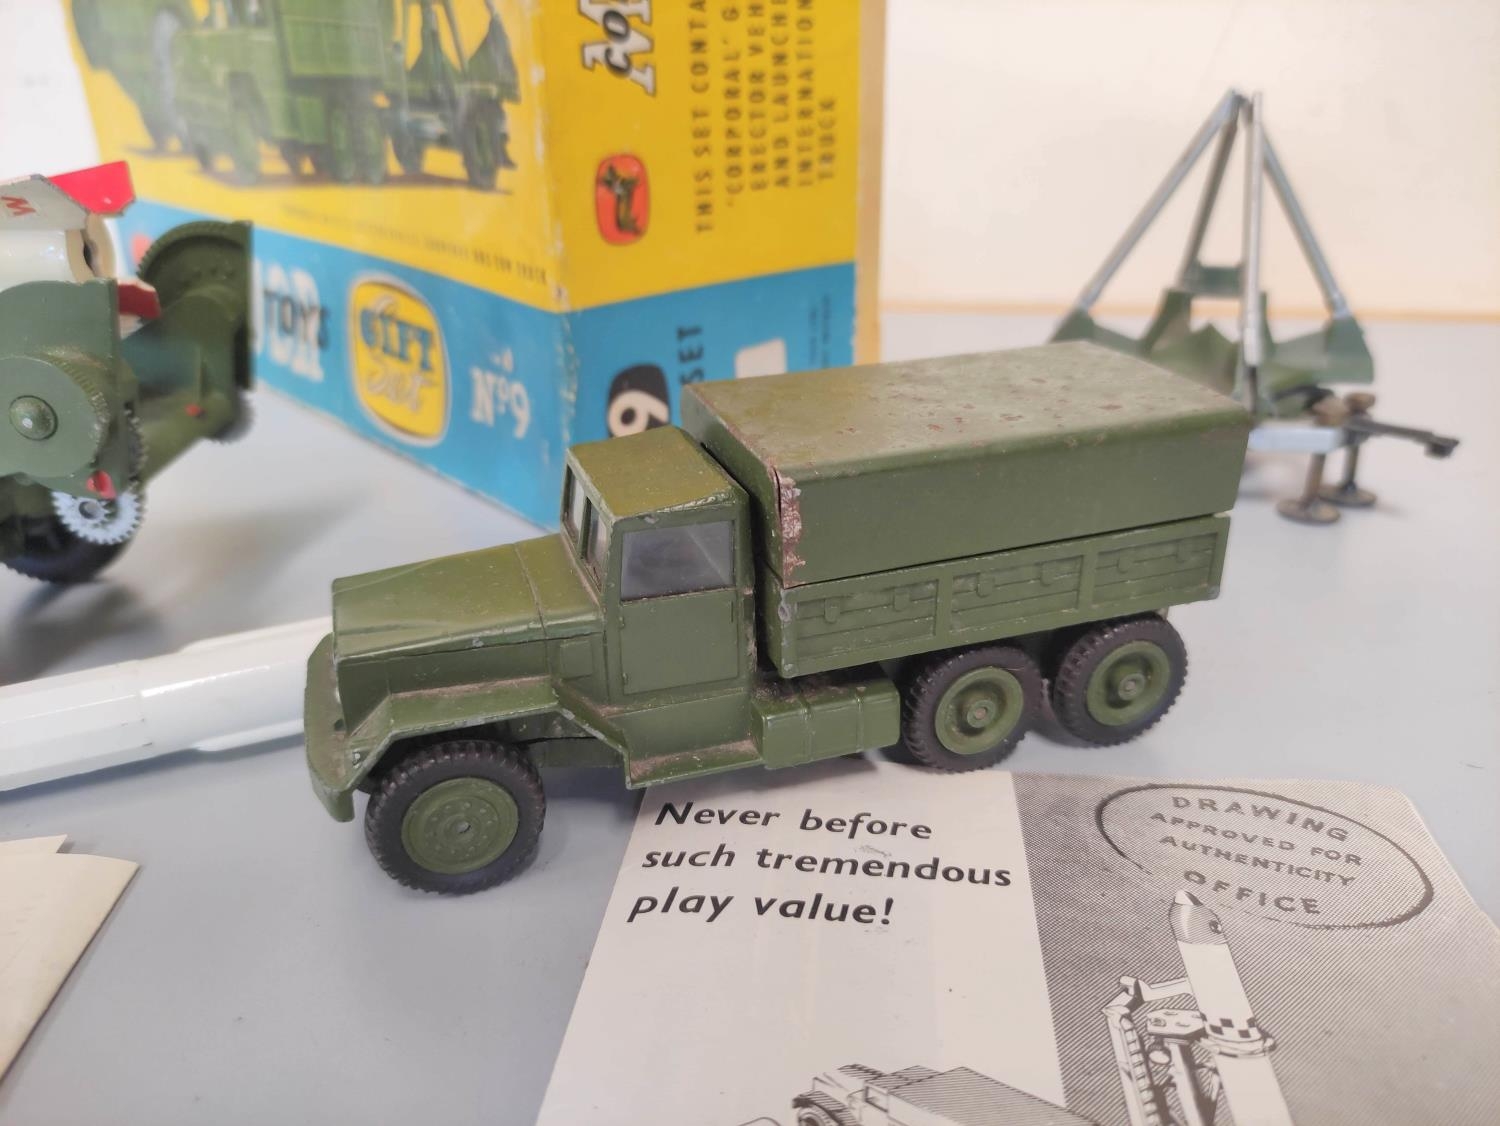 Corgi Toys. Major Gift Set No 9: 'Corporal' Missile, Erector Vehicle, Launcher and Town Truck. Boxed - Image 5 of 6